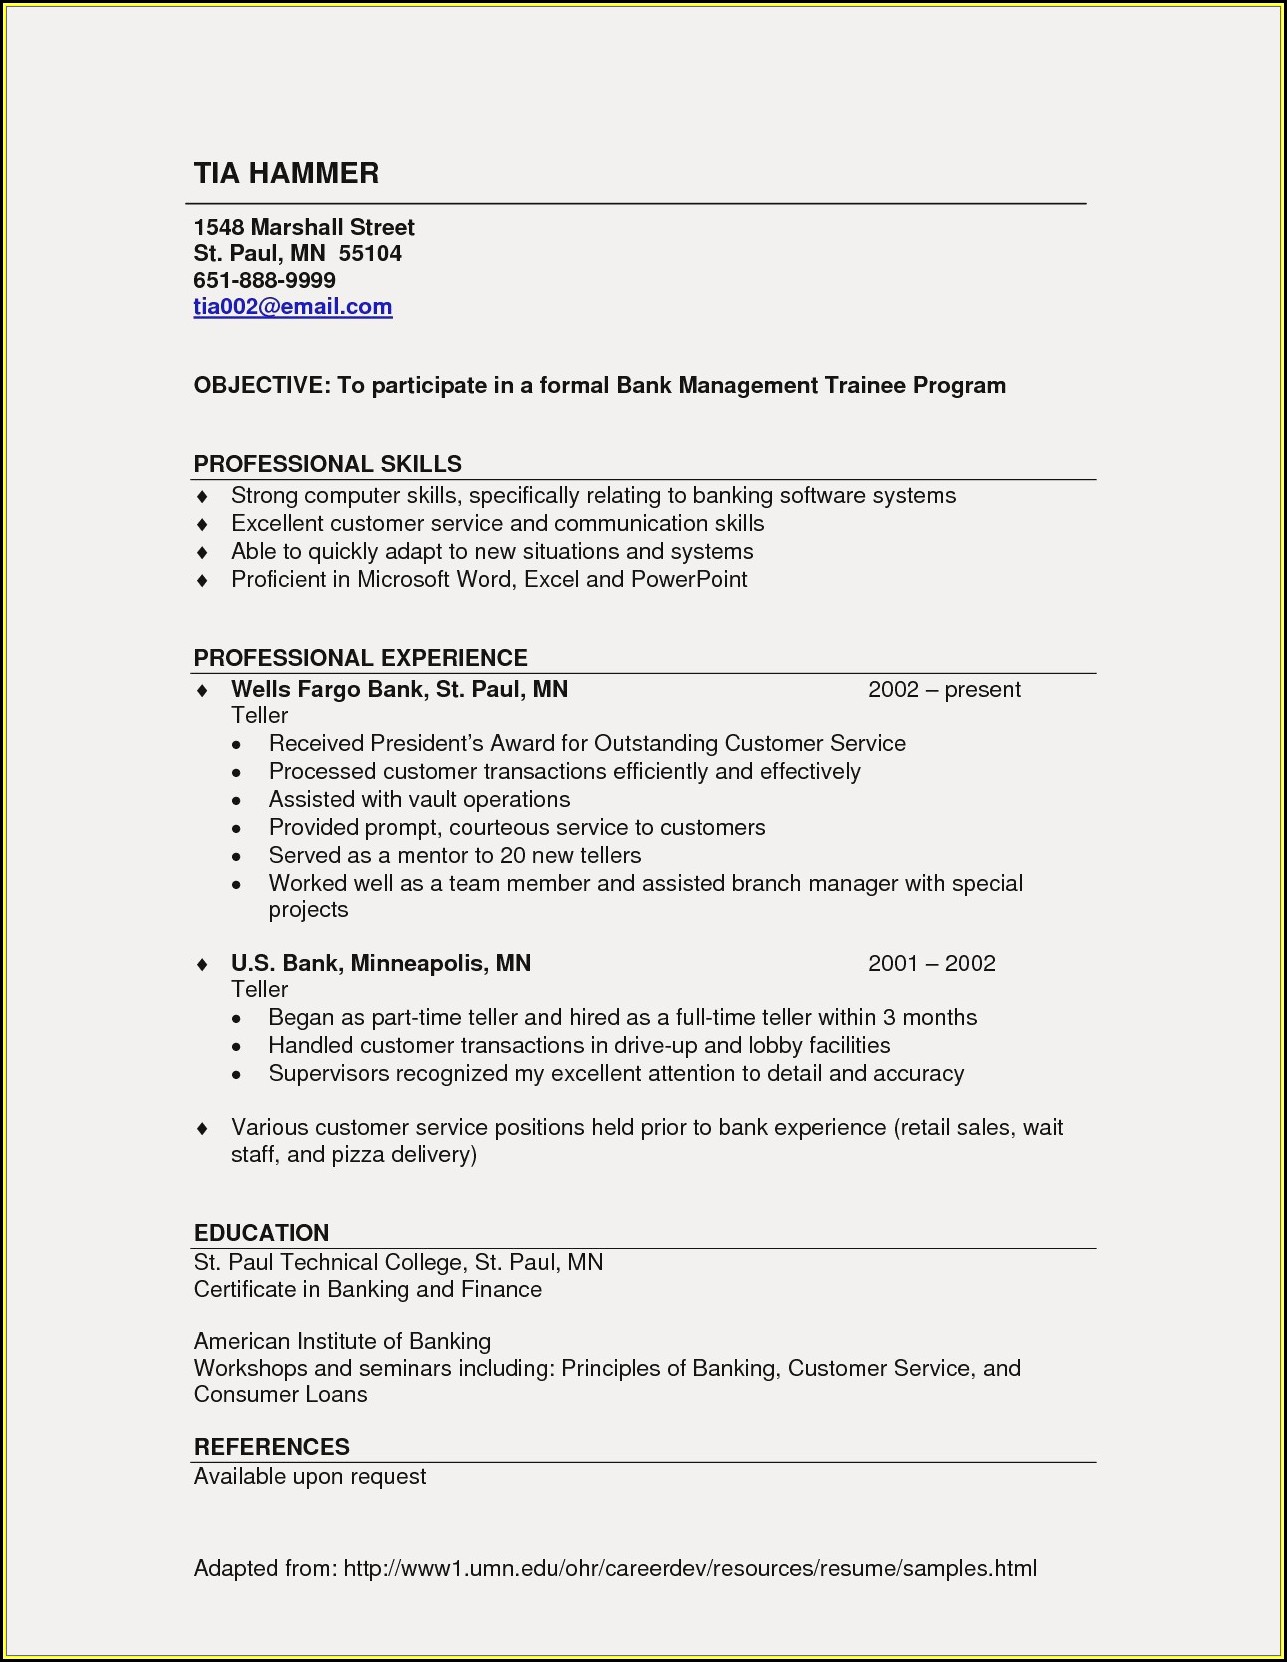 Resume Writing Services St Paul Mn